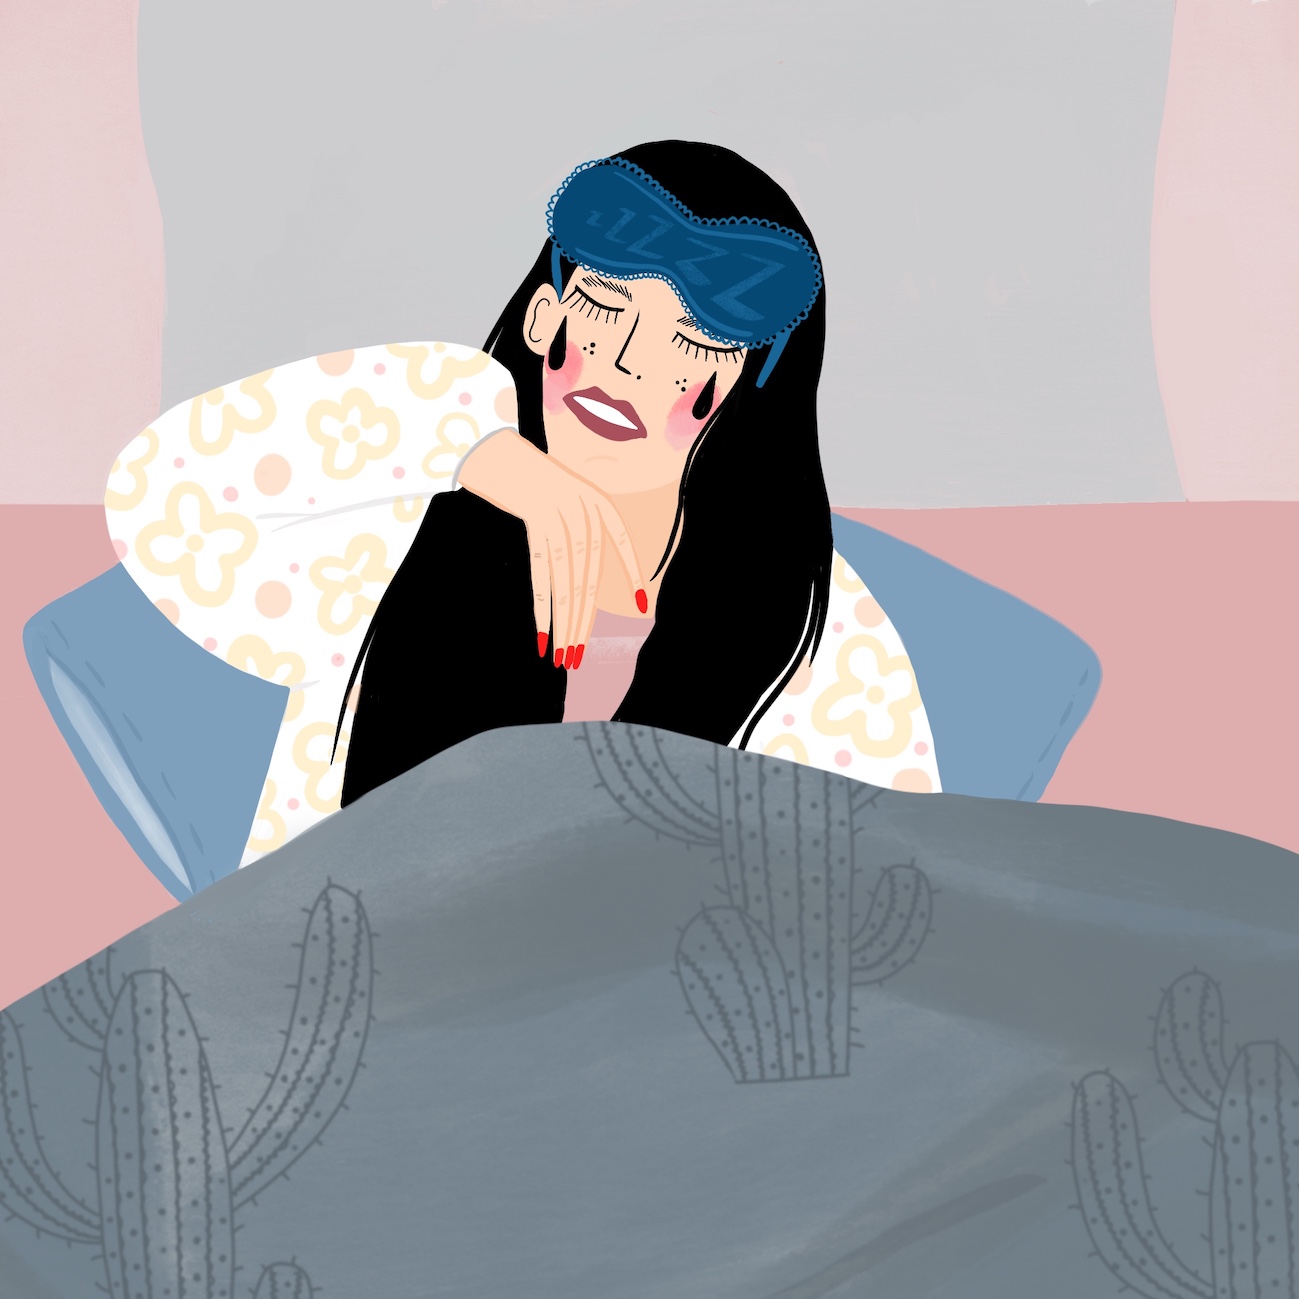 illustration of a crying woman in bed with sore joints wearing a sleeping mask on her forehead